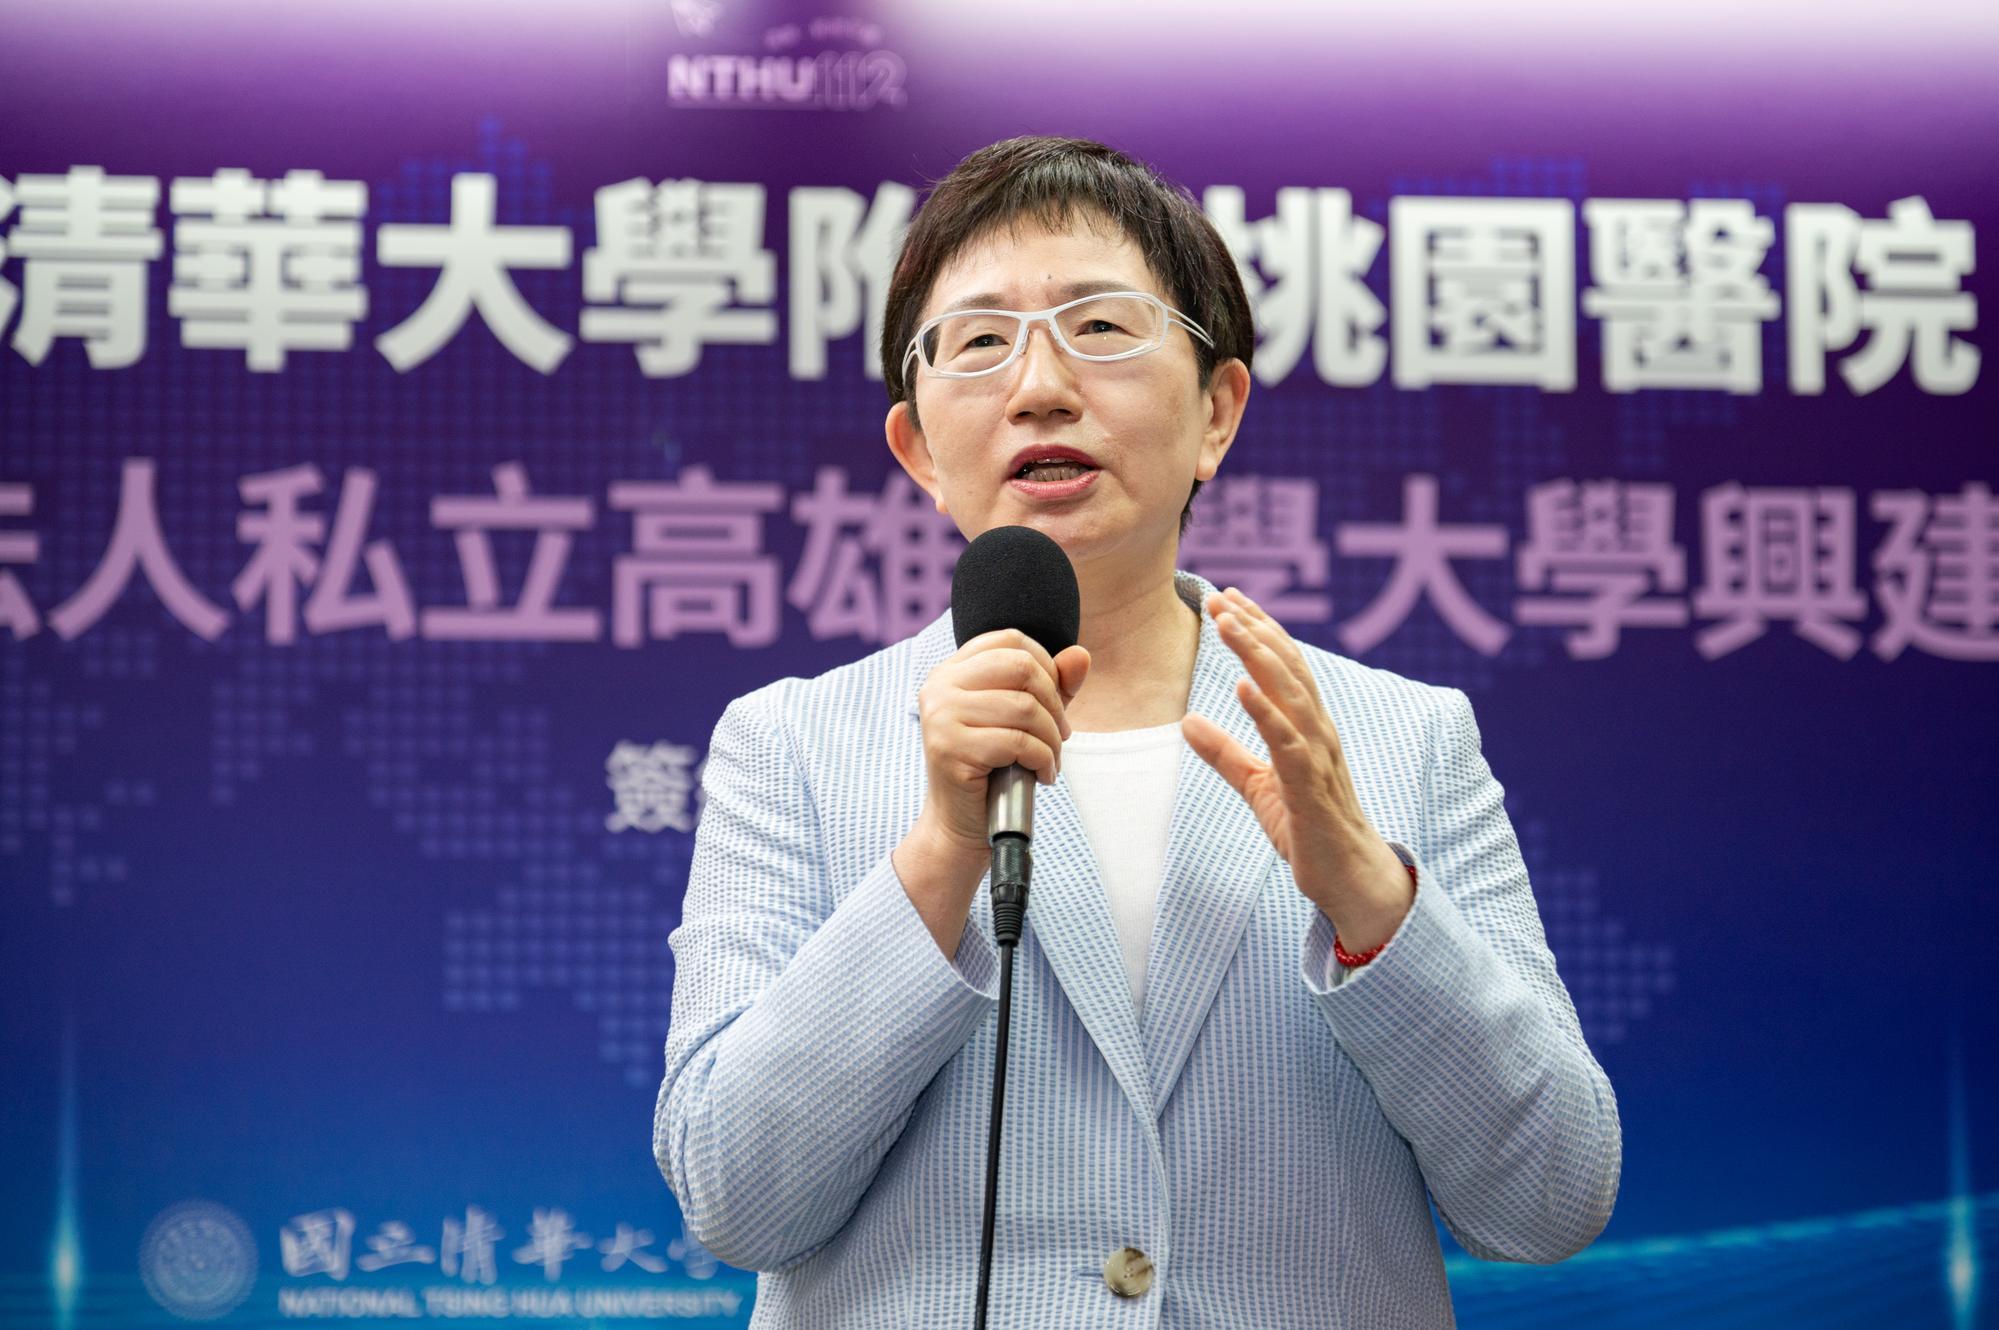 Minister of Finance Tsui-yun Chuang (莊翠雲) confirmed that KMU will invest more than NT$10 billion in the NTHU BOT hospital project, making it the largest private sector investment in public infrastructure under the jurisdiction of the MOE.